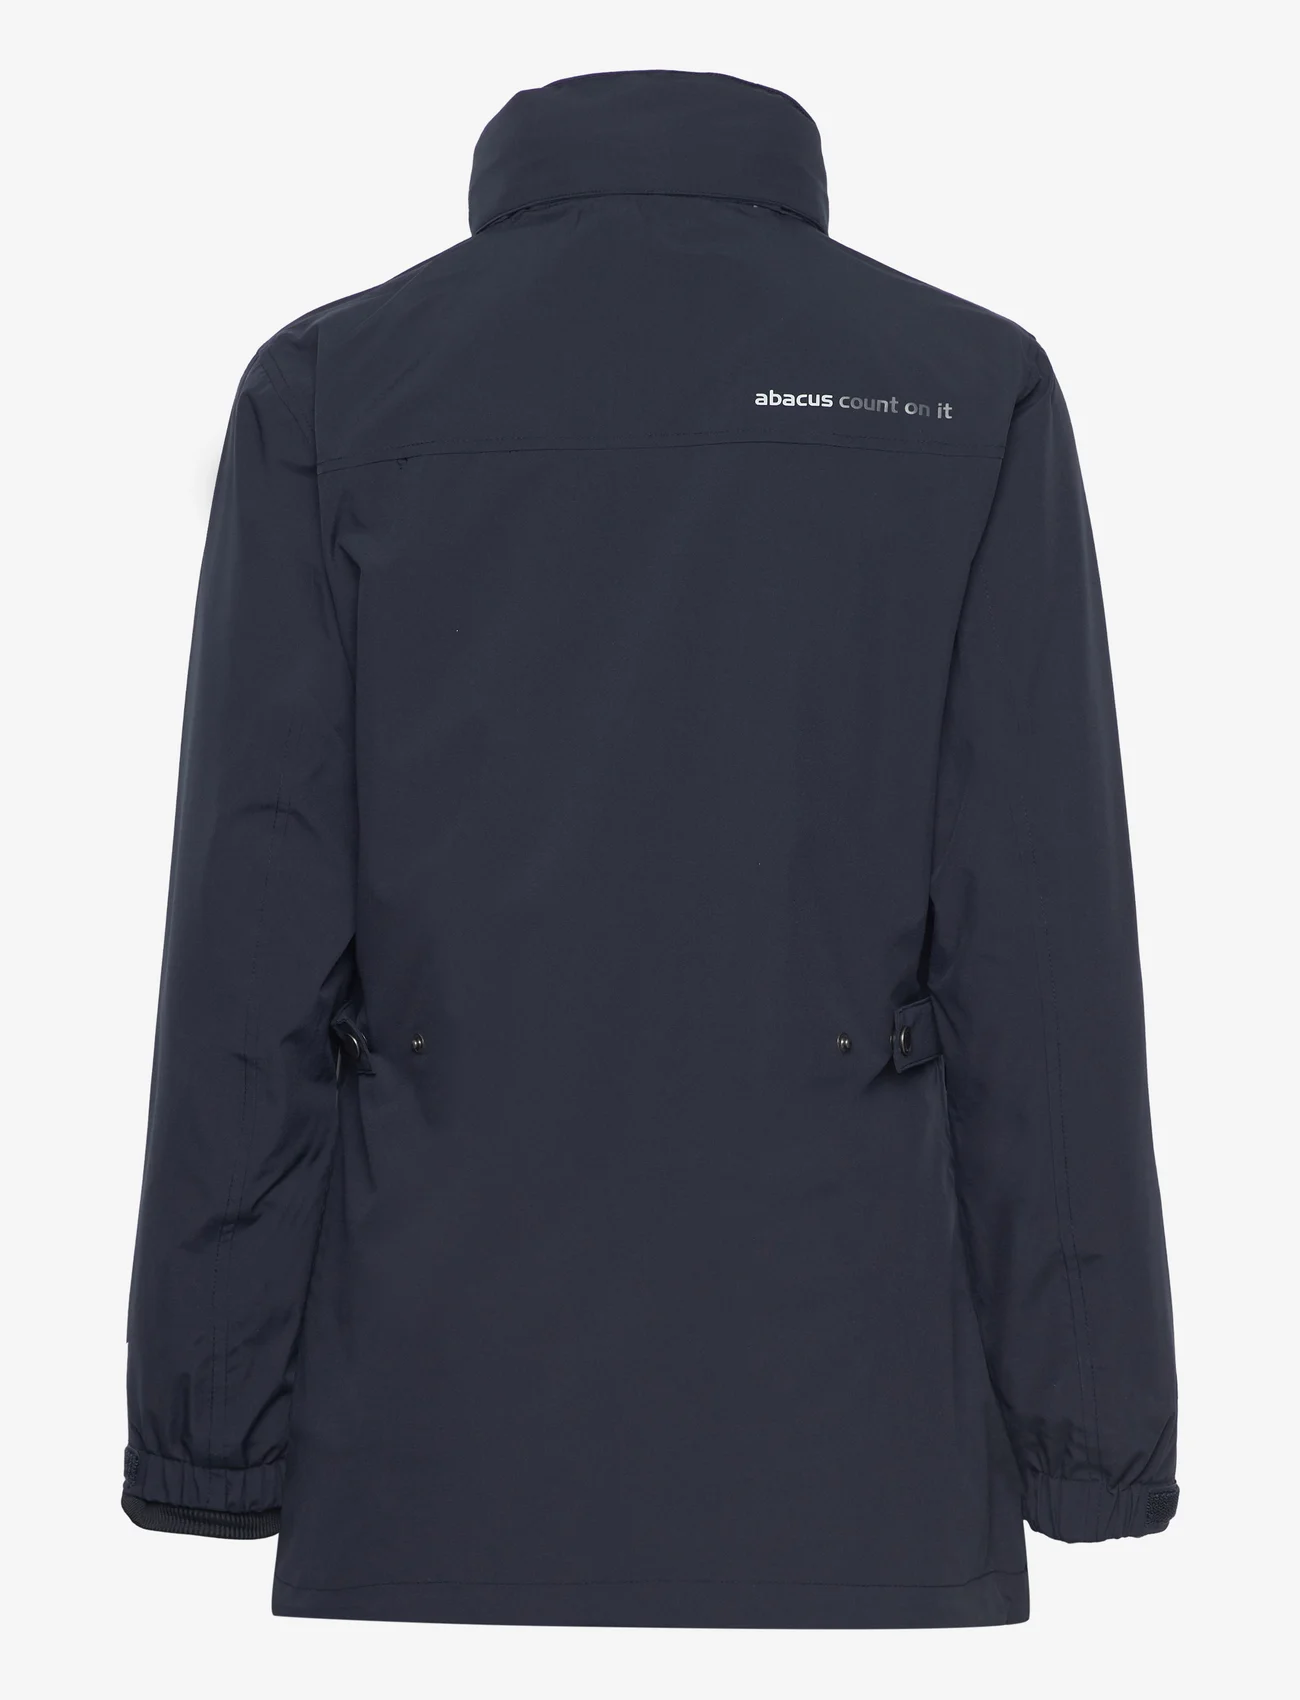 Abacus - Lds Staff 3 in1 jacket - parkatakit - navy - 1